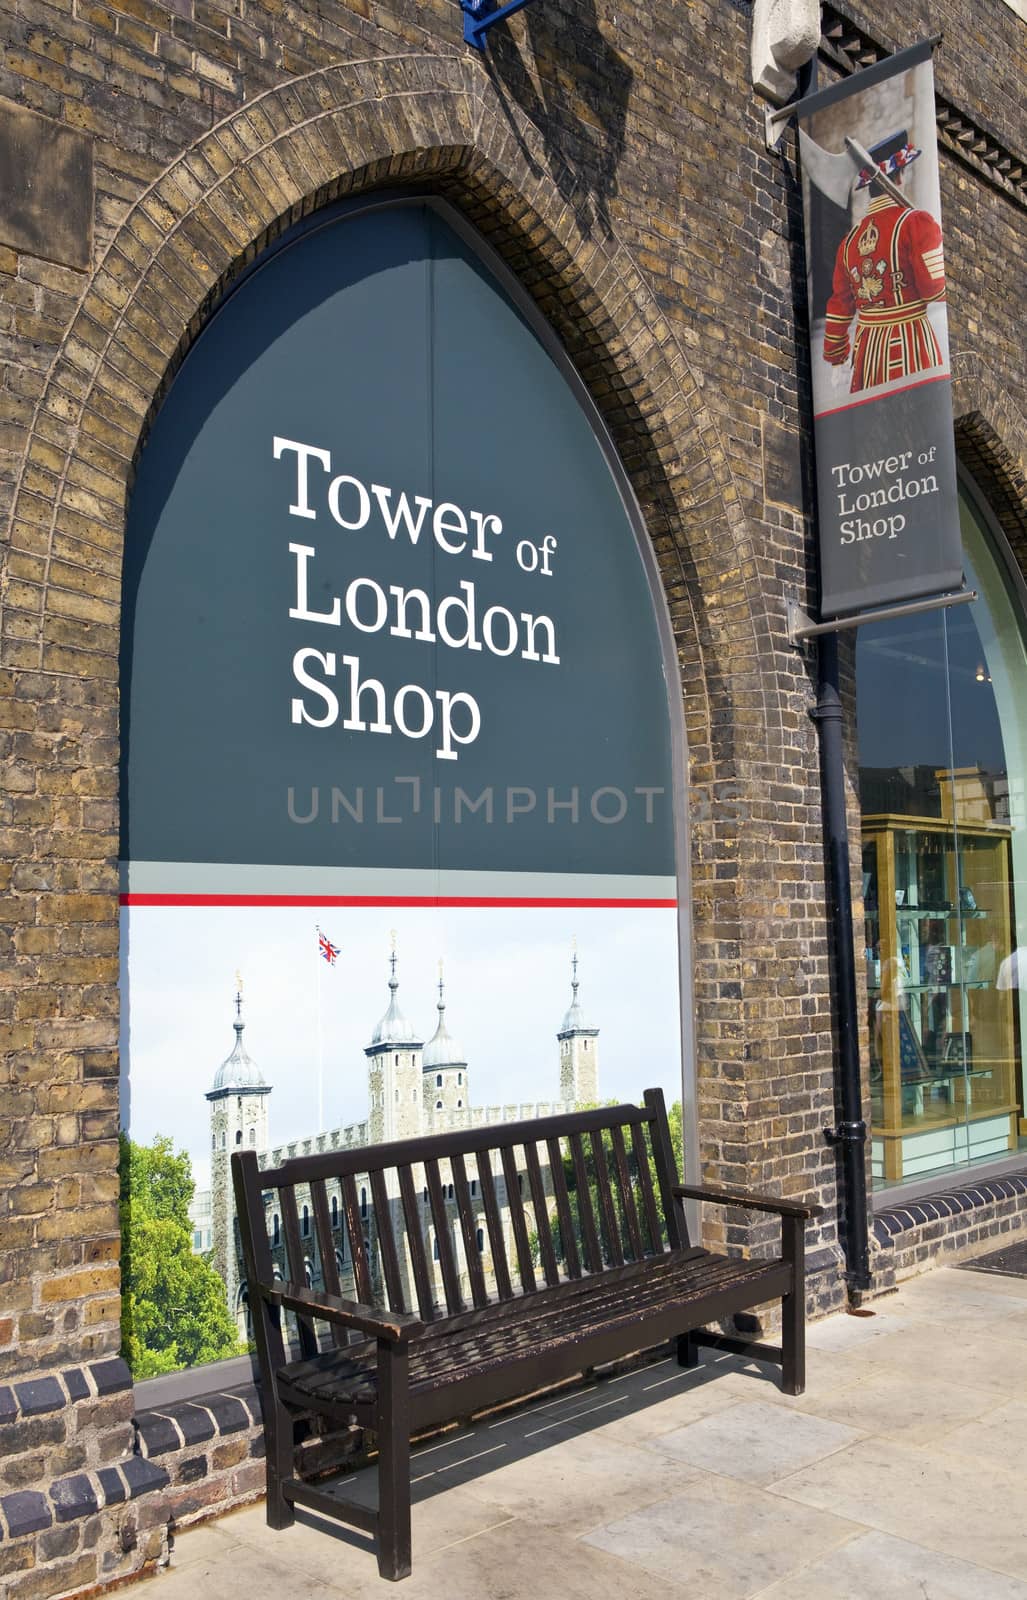 The Tower of London shop in London.